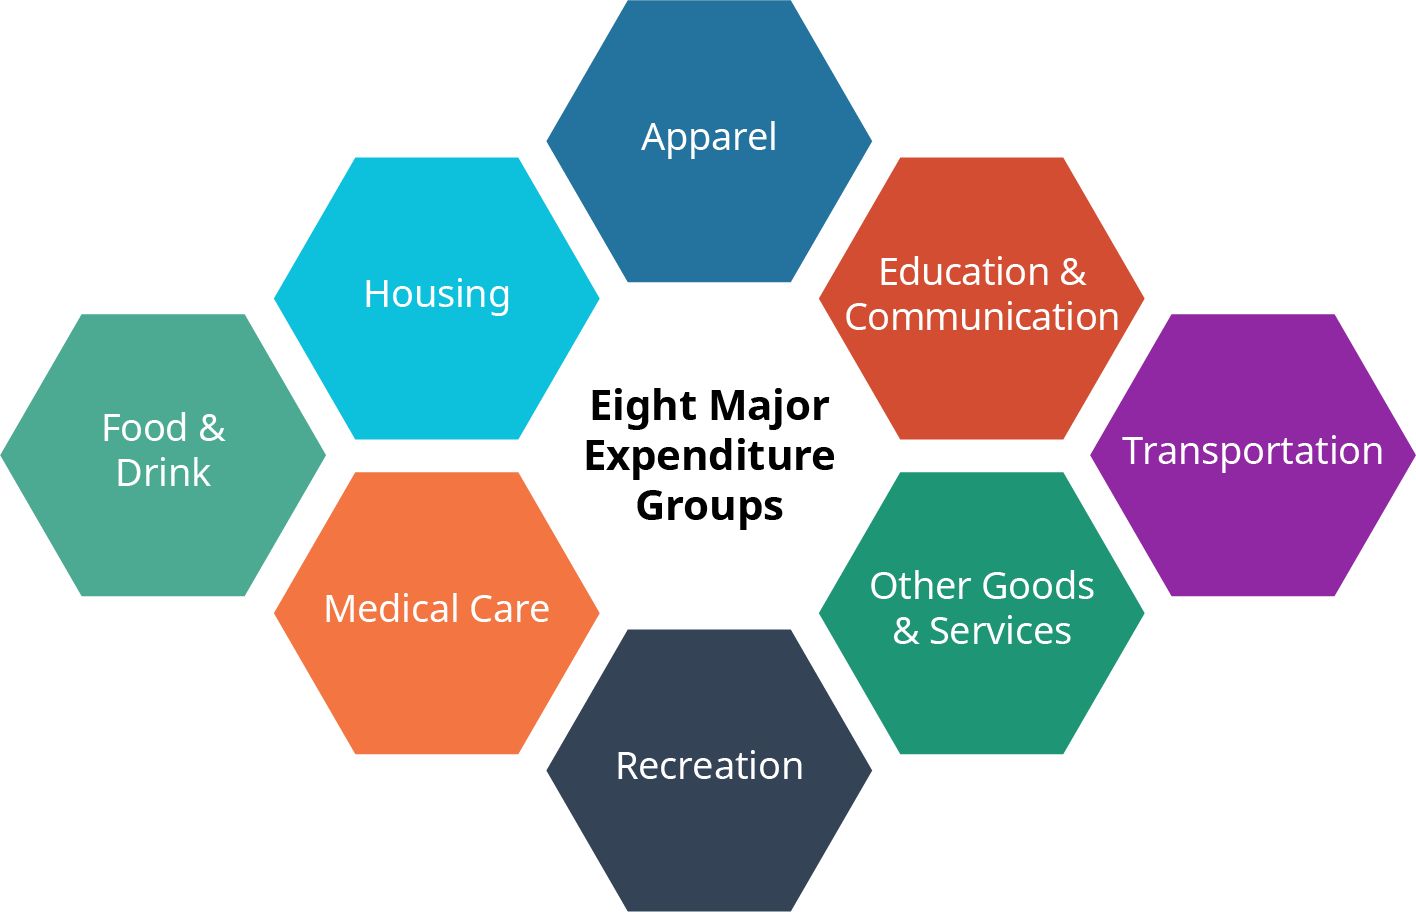 A diagram of the Market Basket Categories of Consumer Price Index. There are eight major expenditure groups: Food and Drink, Housing, Apparel, Education & Communication, Transportation, Other Goods & Services, Recreation, and Medical Care.